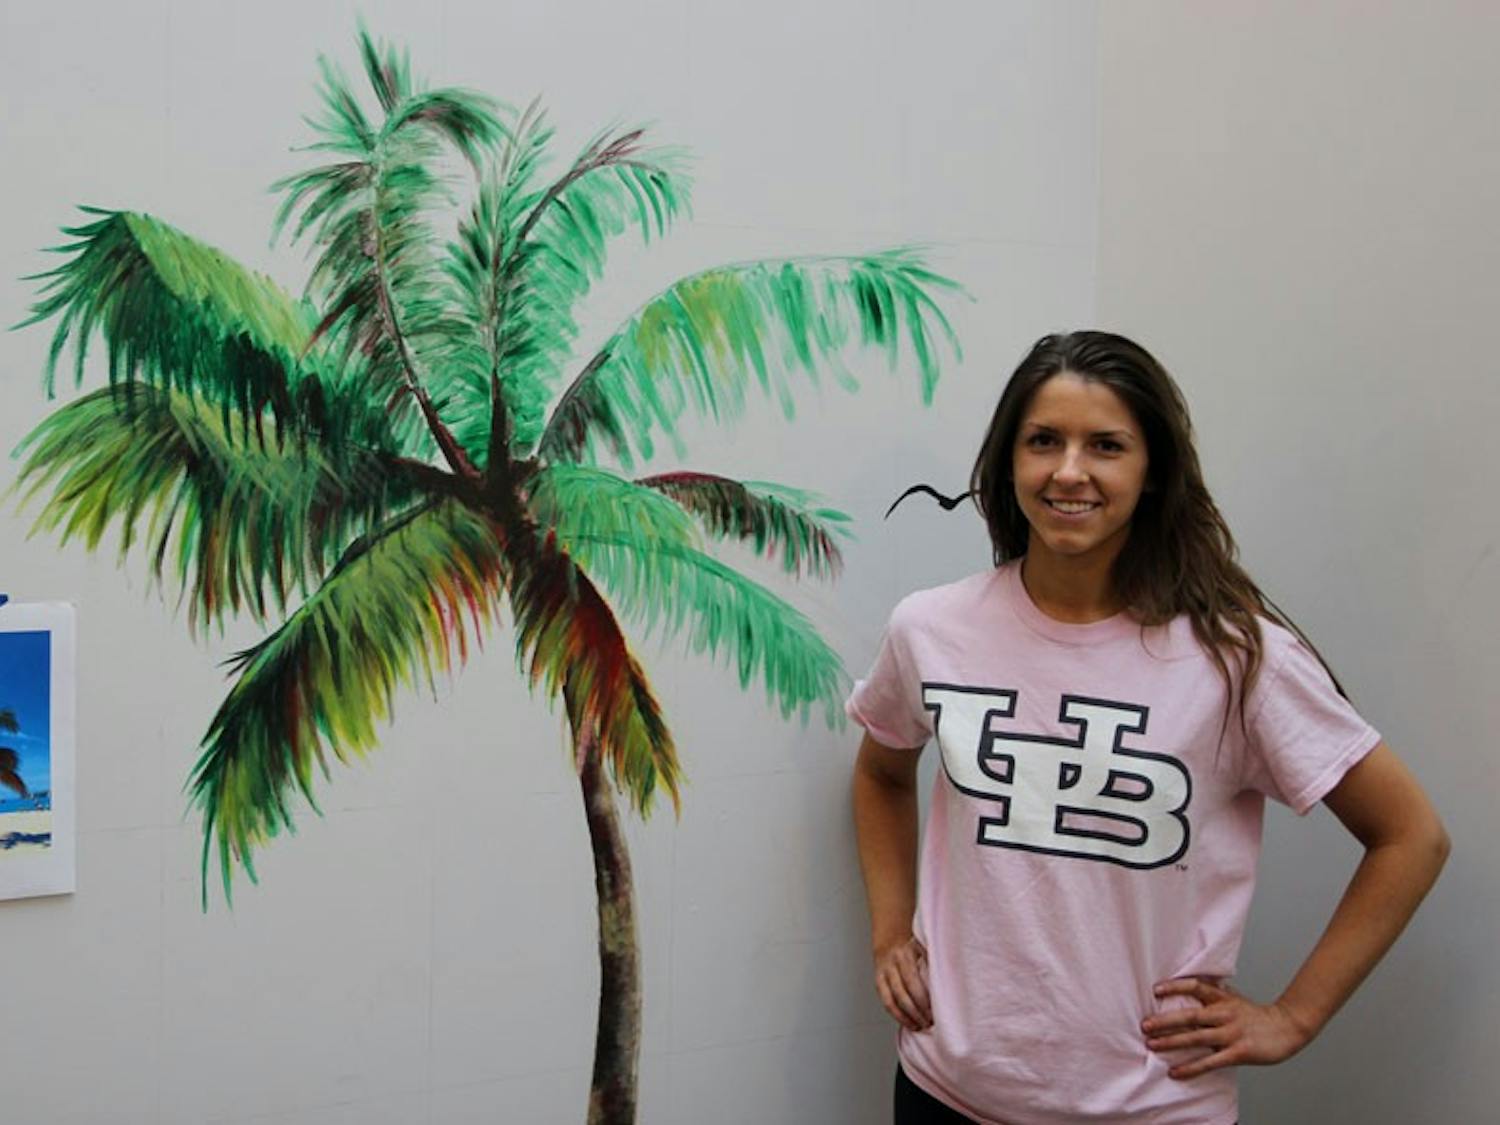 Paula Zych, a junior fine arts major and Buffalo native, wanted to bring a piece of tropical happiness Buffalo - her own mini-rebellion against Buffalo’s oppressive winter weather.